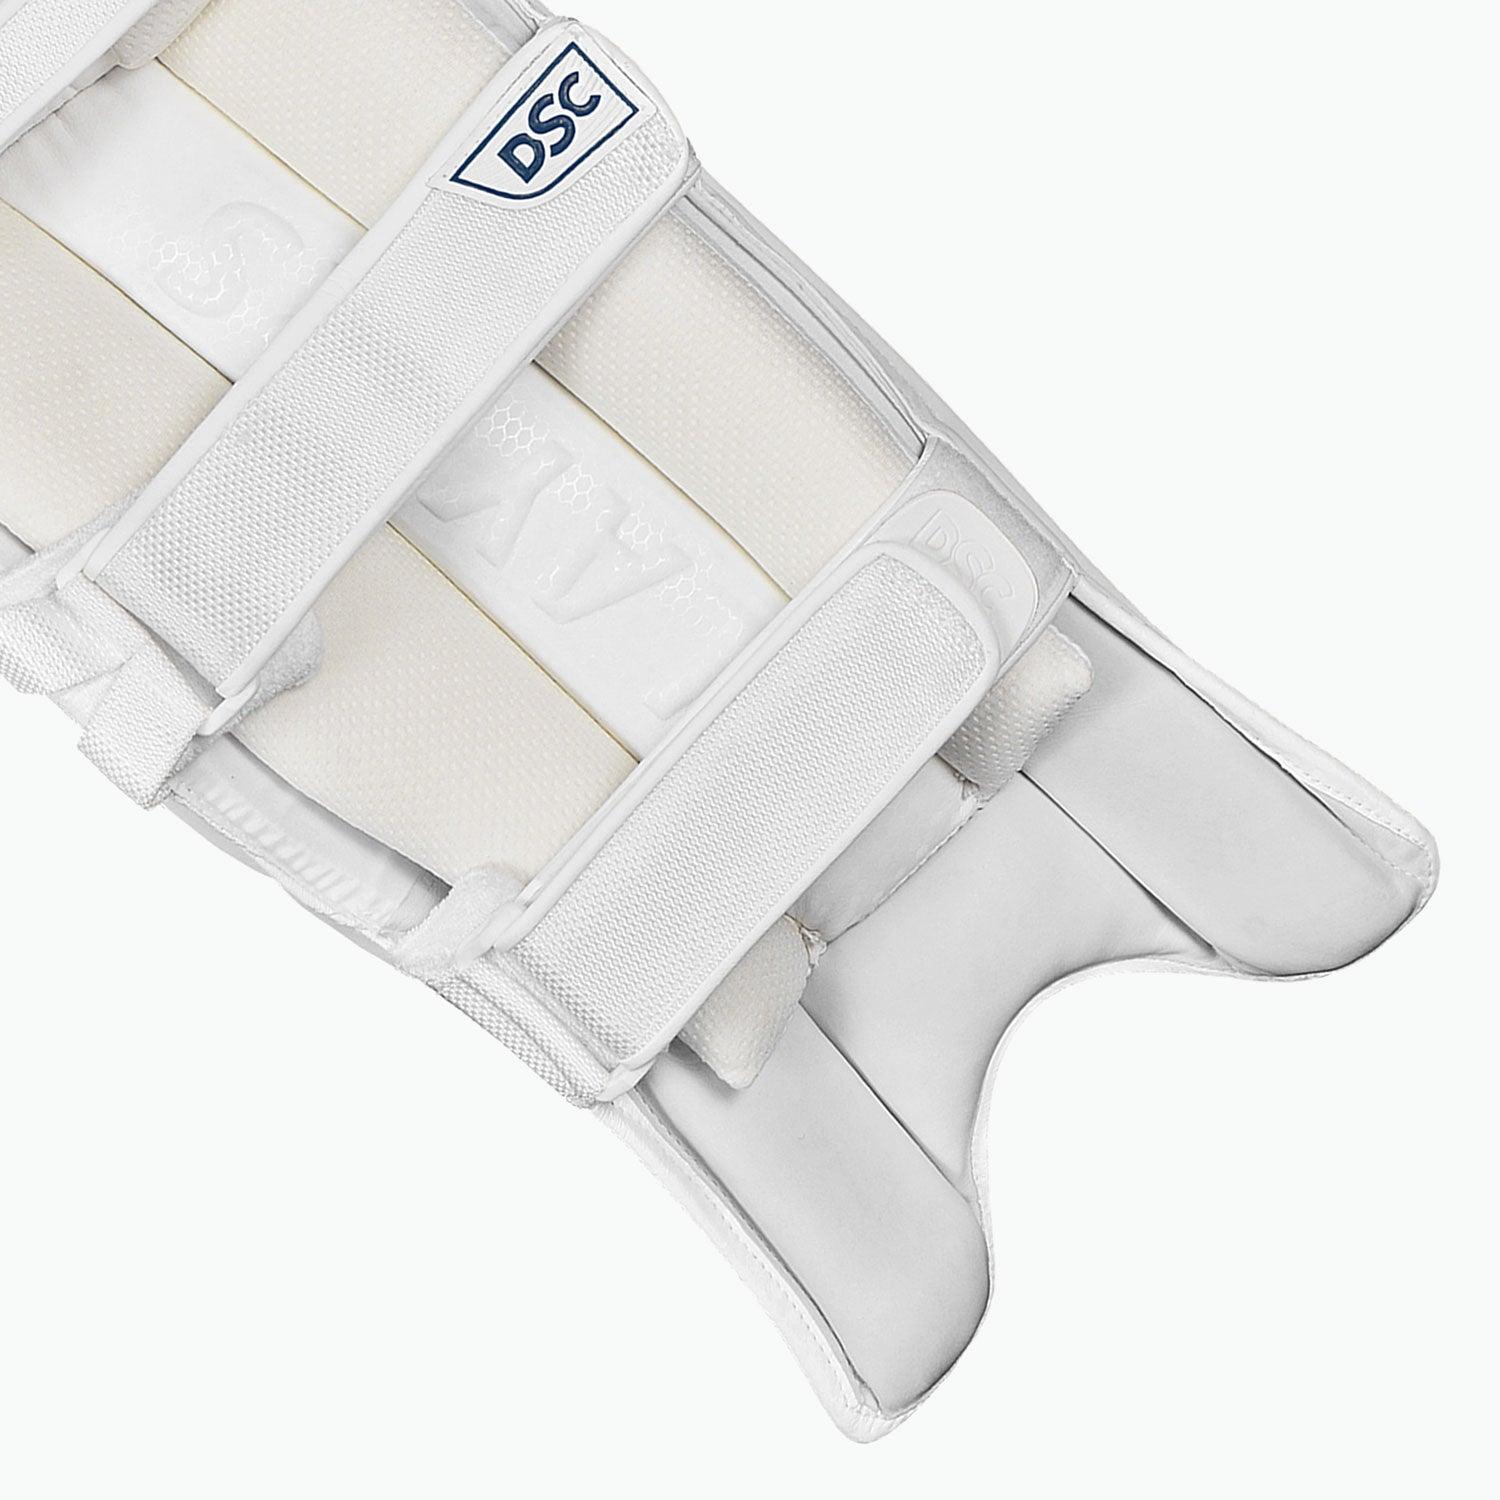 DSC Pearla Players Cricket Batting Pads - ADULT - AT Sports